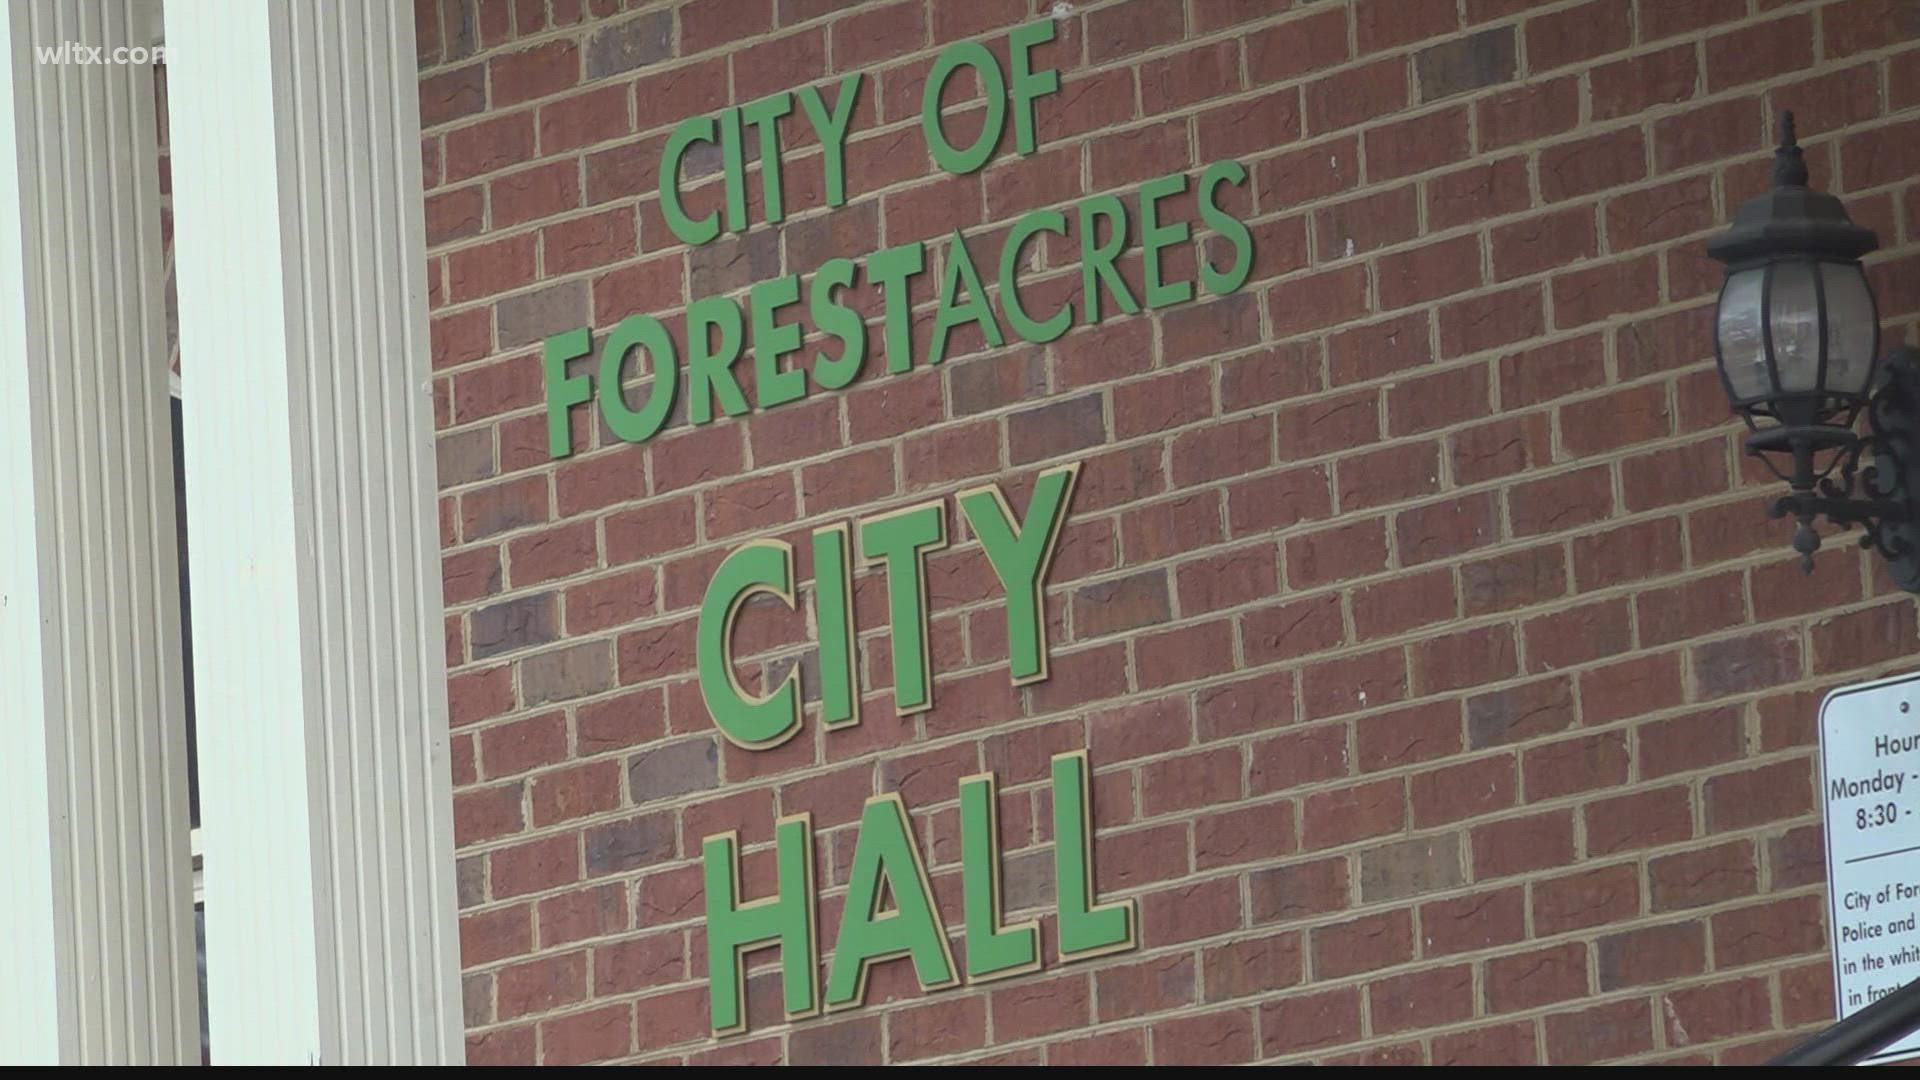 The city feels that rezoning could be extremely detrimental to the community and negatively impact property values.